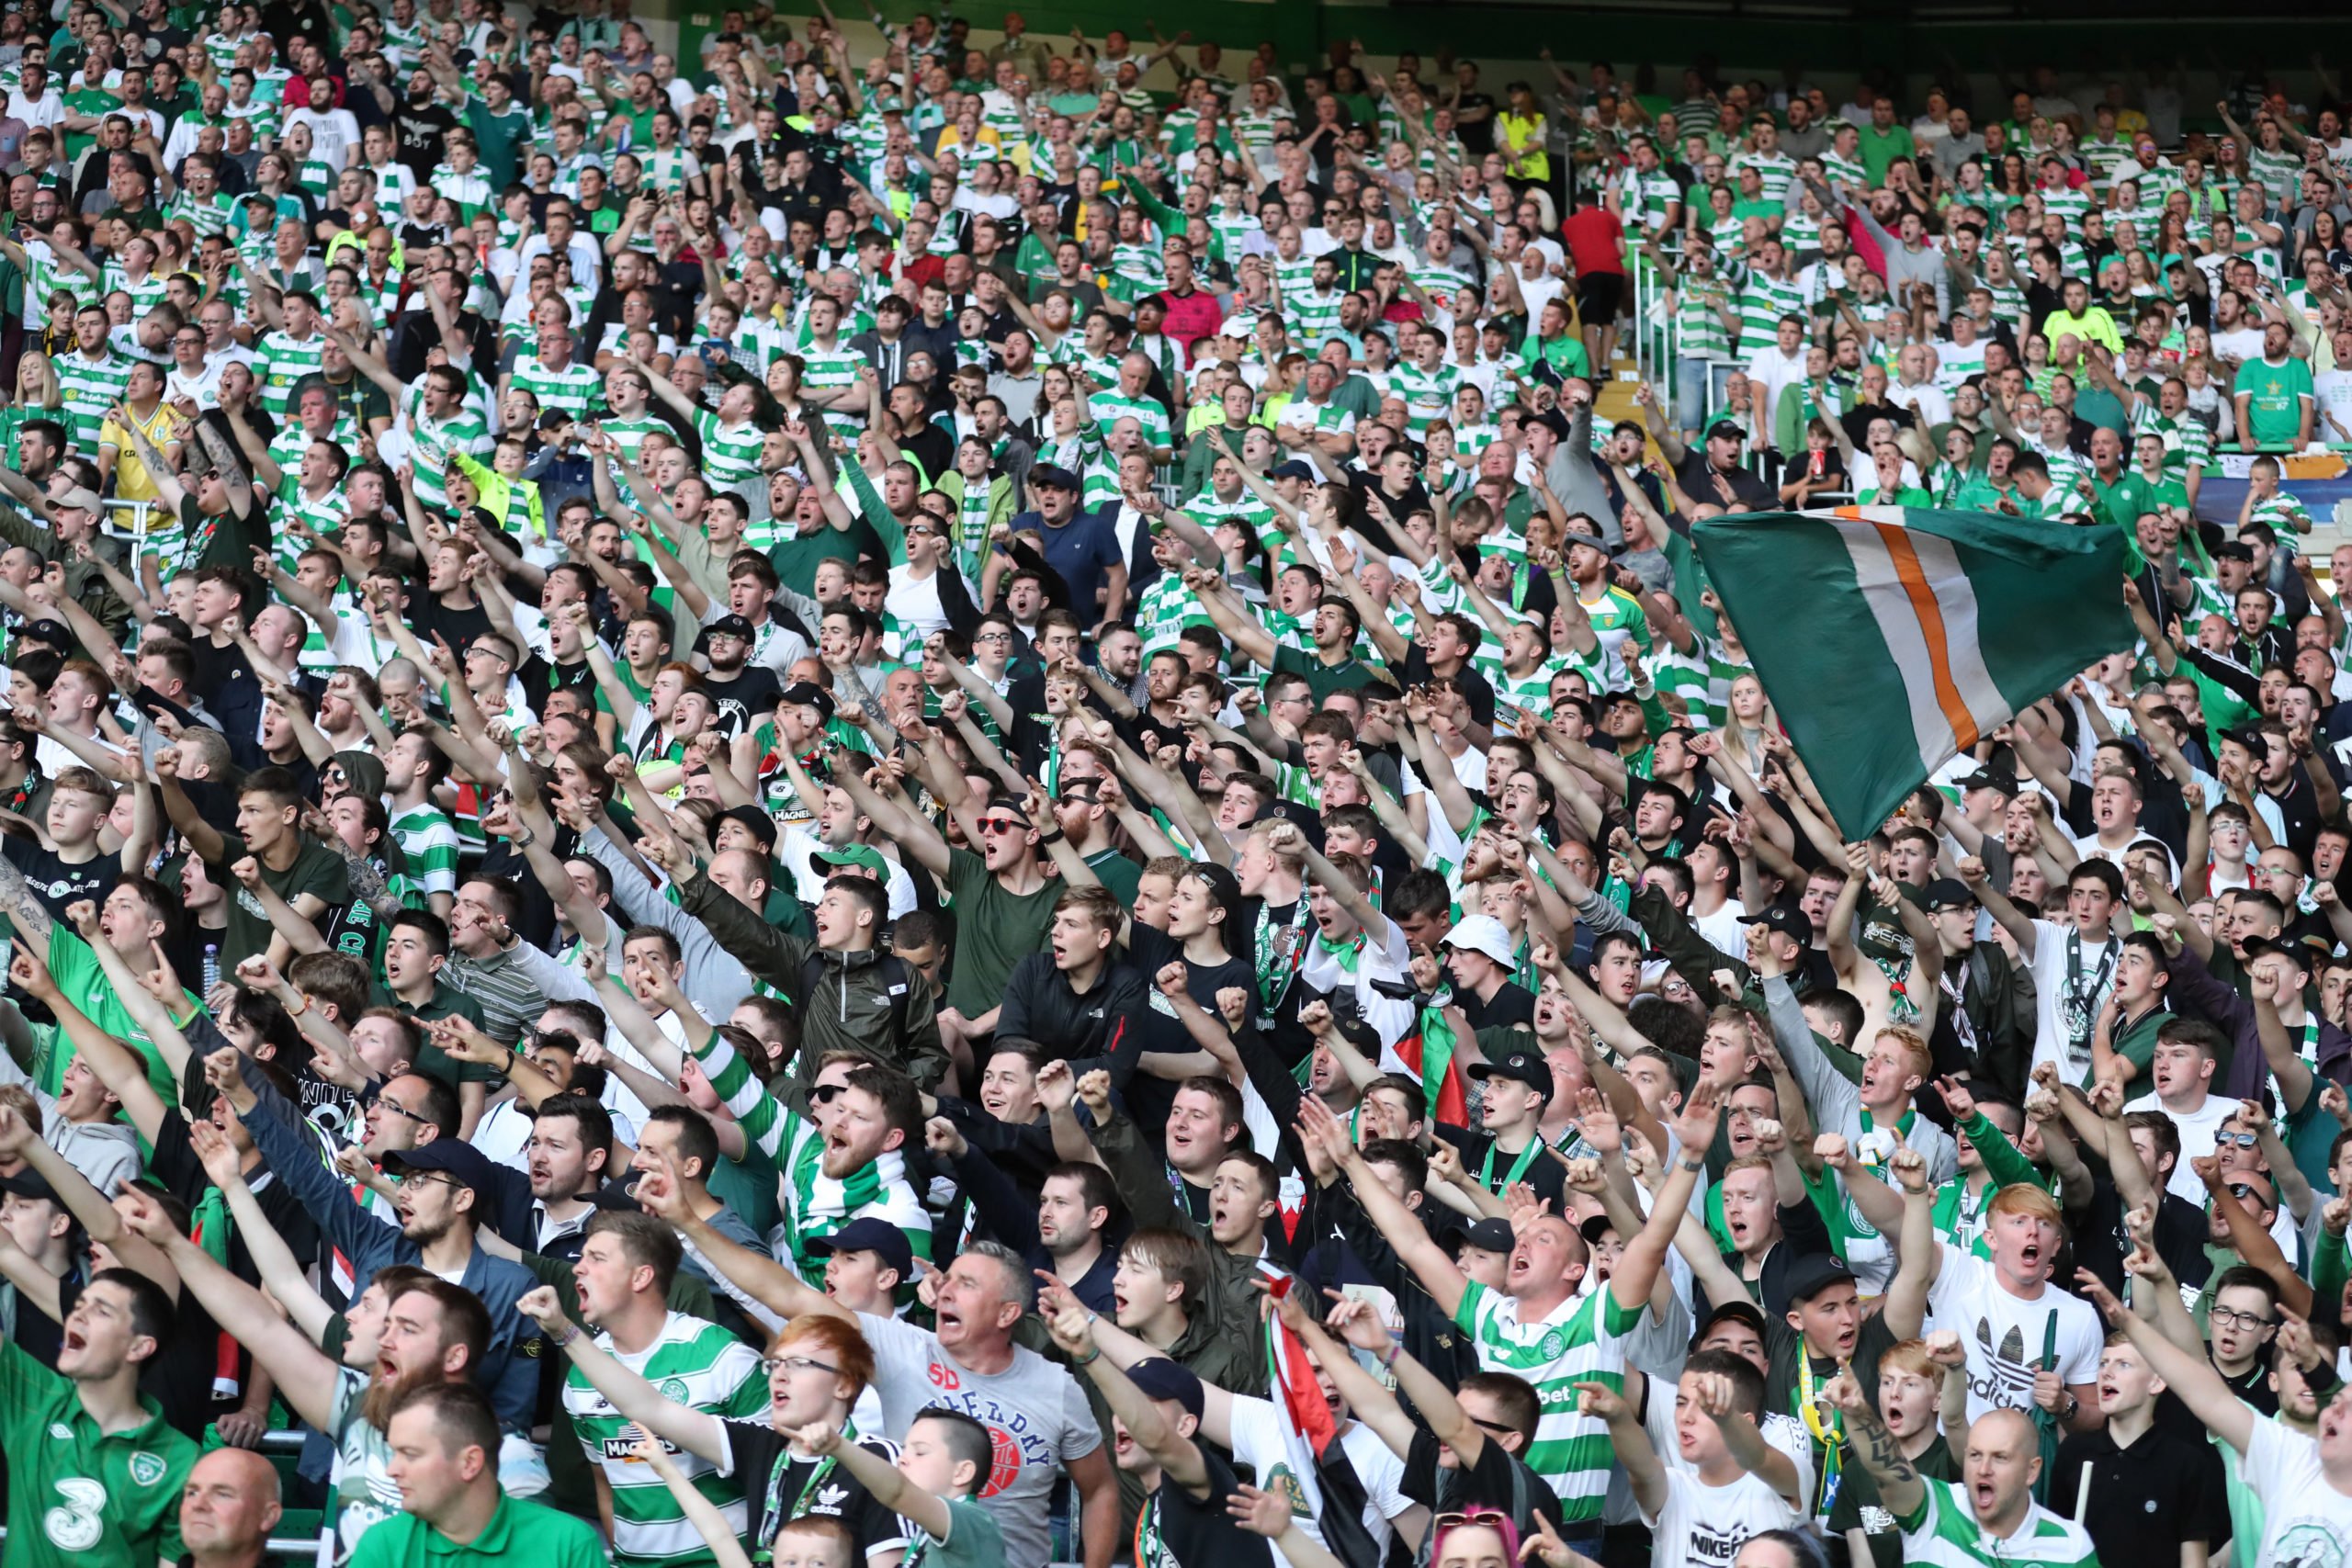 Green Brigade take aim at whole Celtic board in another banner display